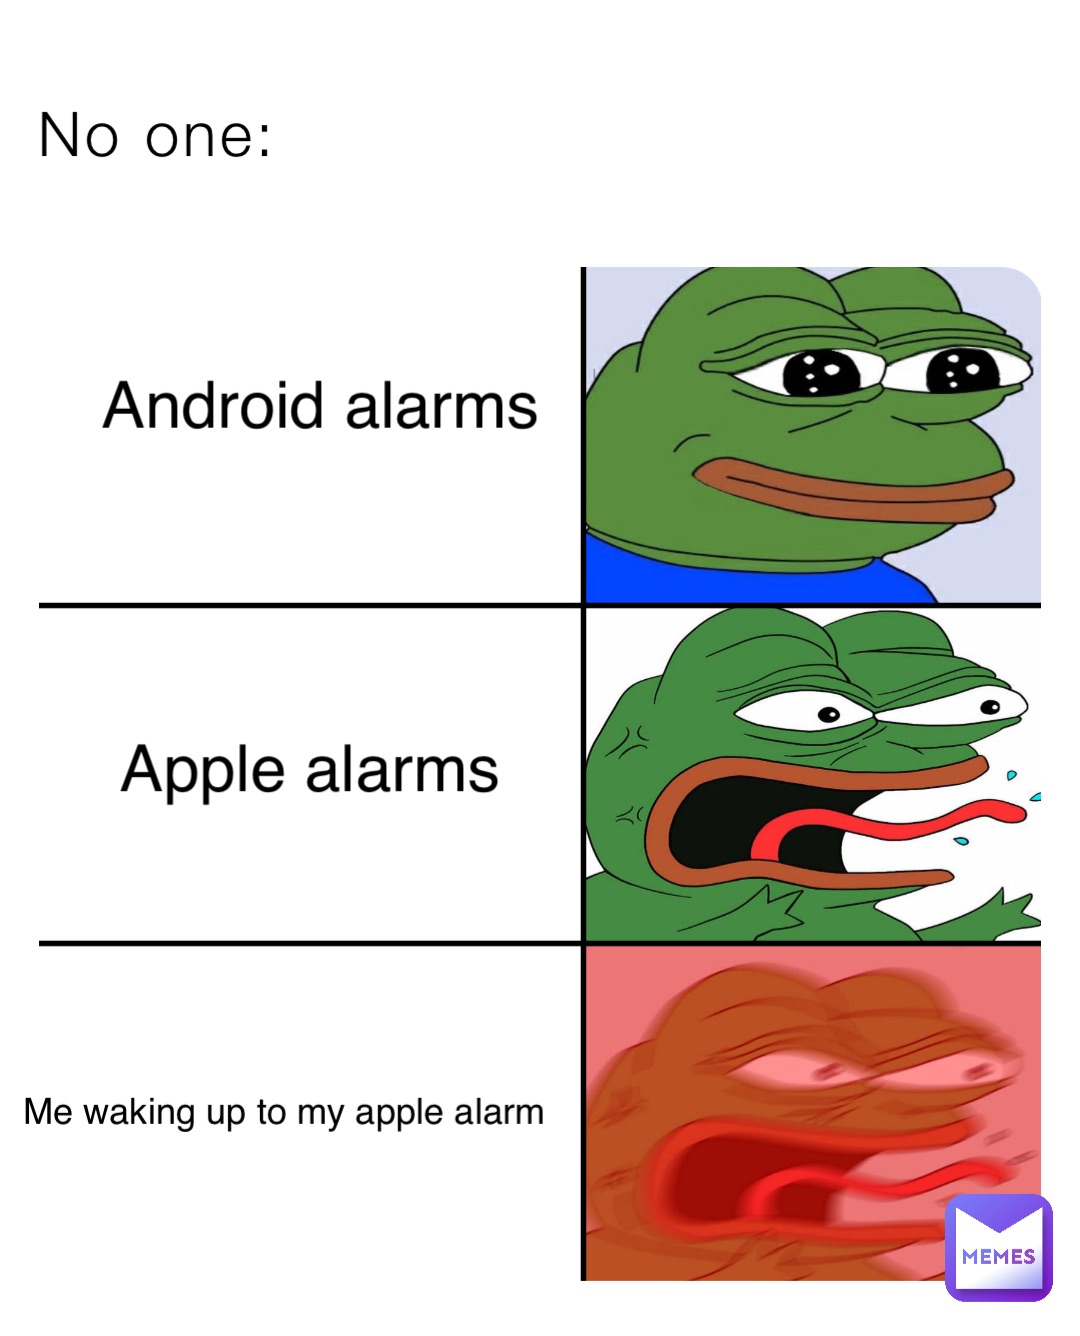 No one: Android alarms Apple alarms Me waking up to my apple alarm